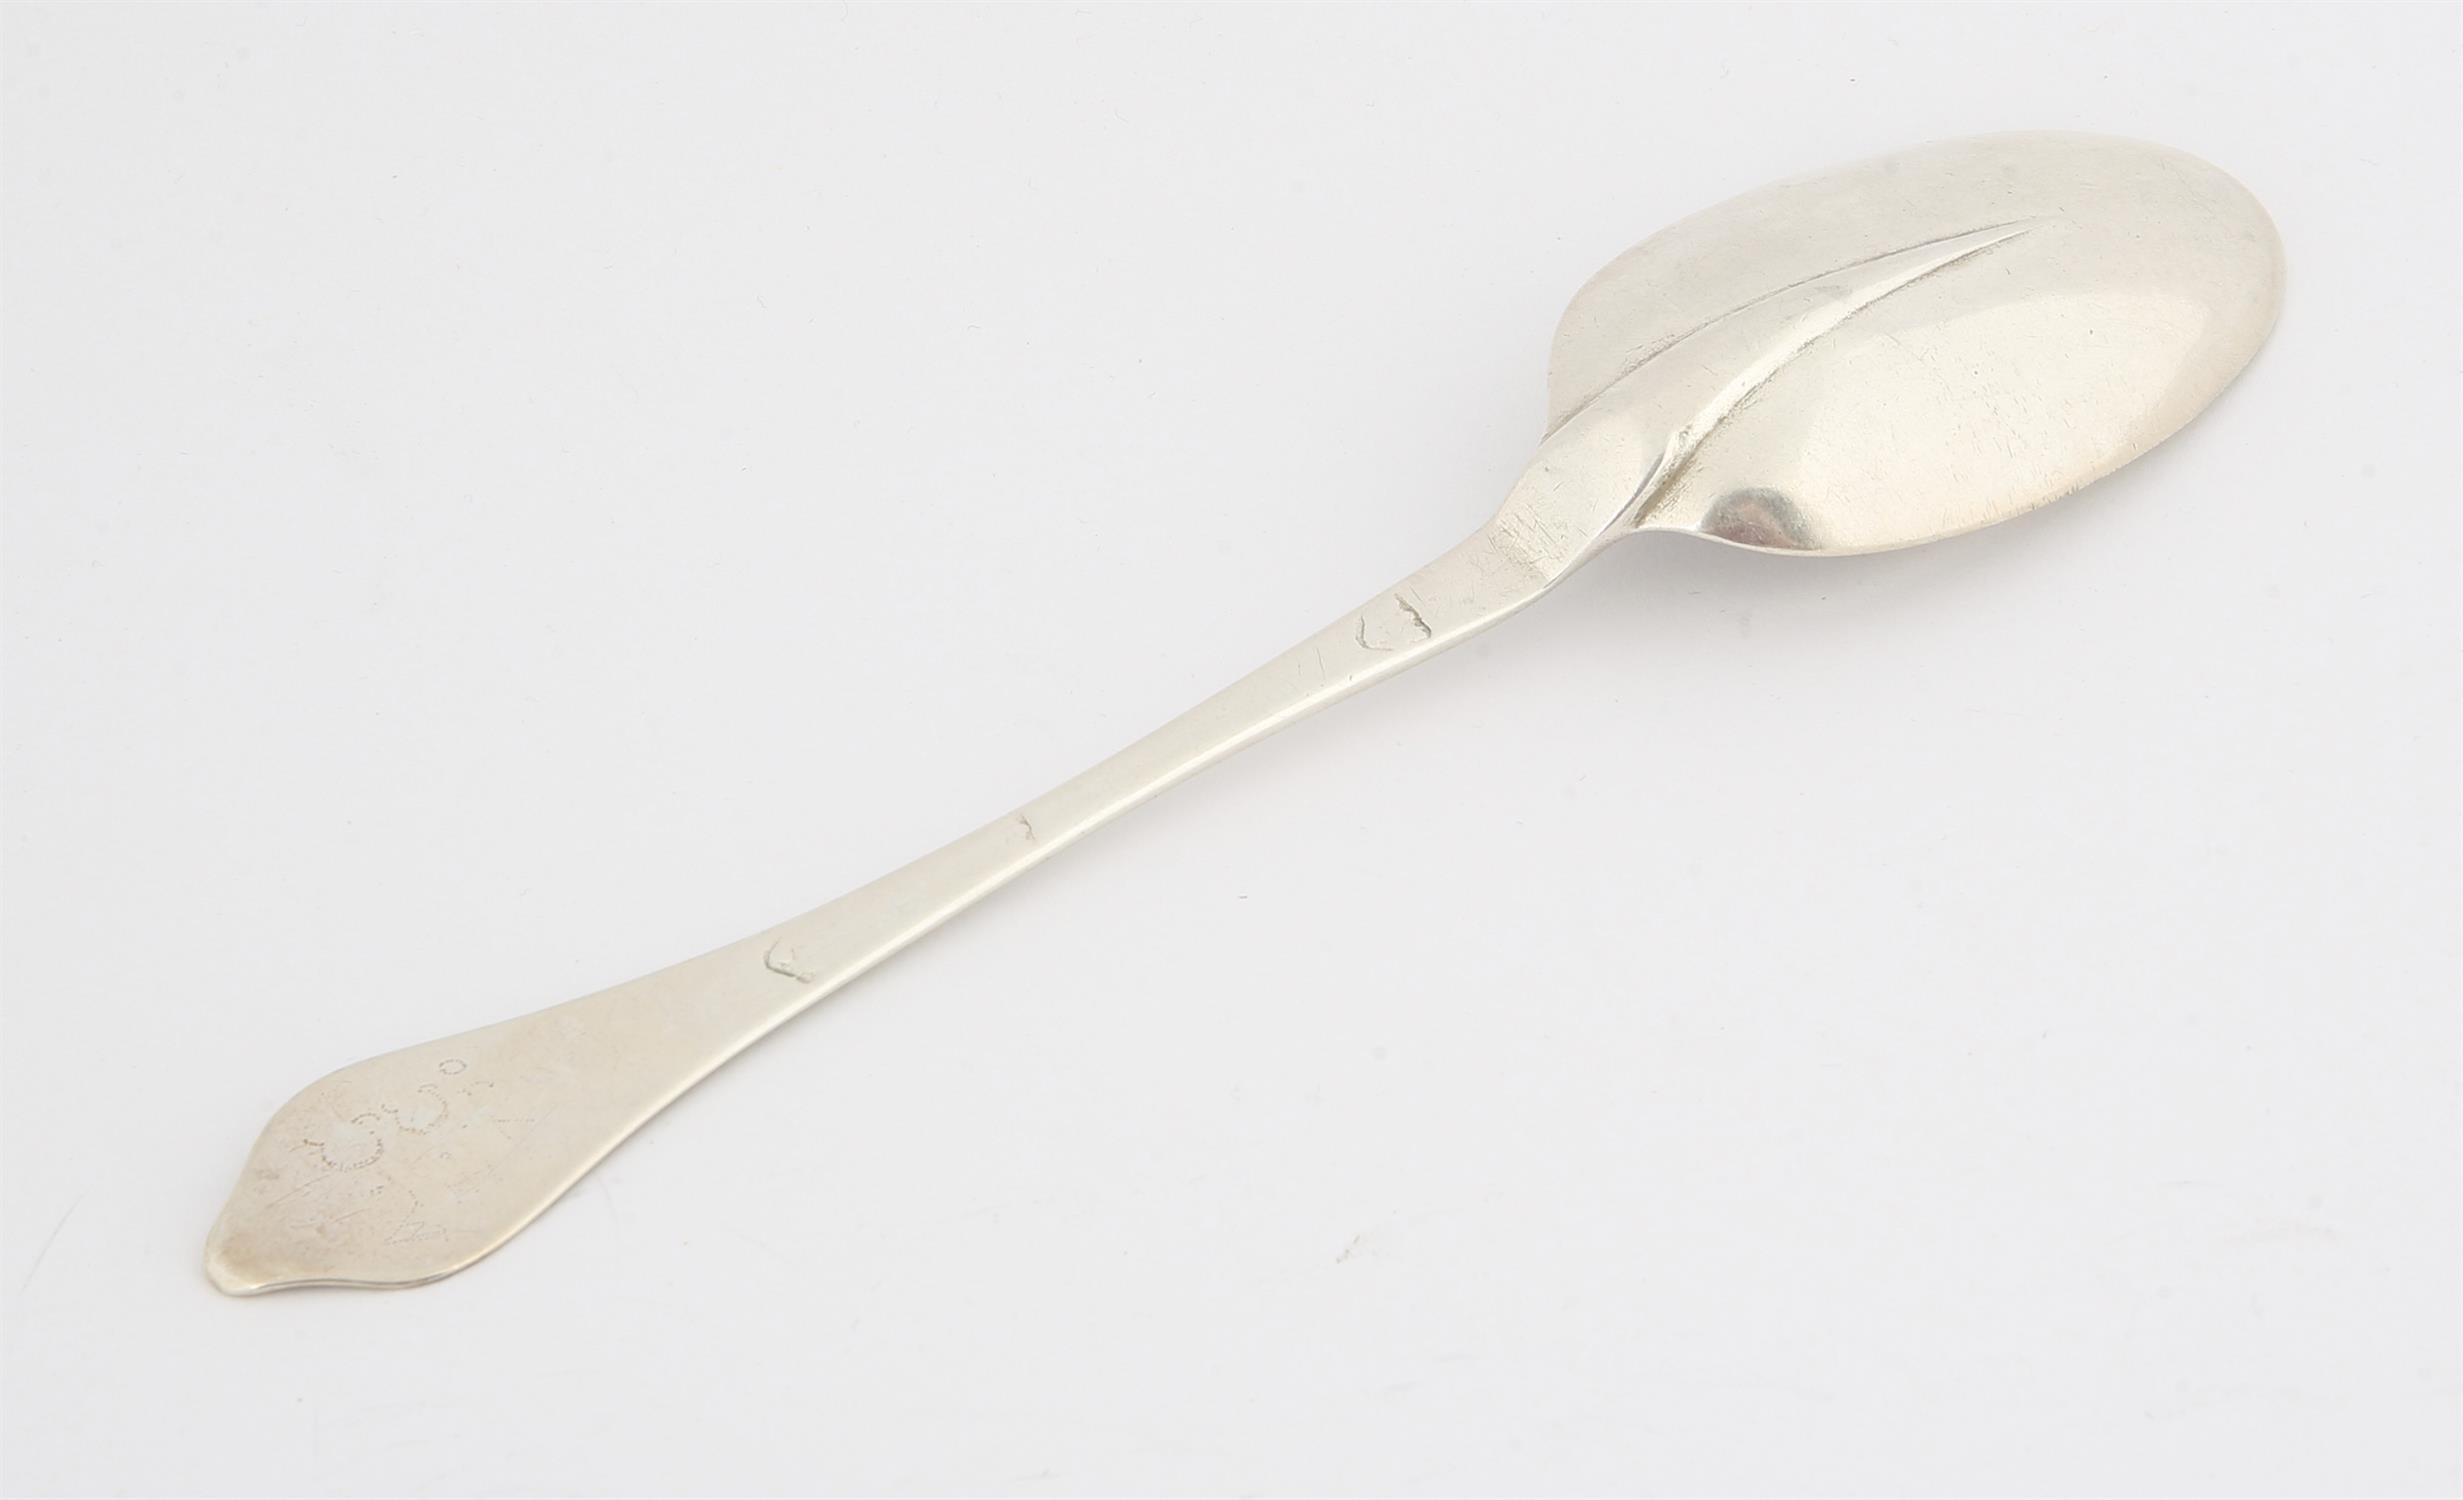 Silver dog nose spoon, marks rubbed but probably circa 1700 SILVER COLLECTION OF SIR RAY TINDLE - Image 2 of 4